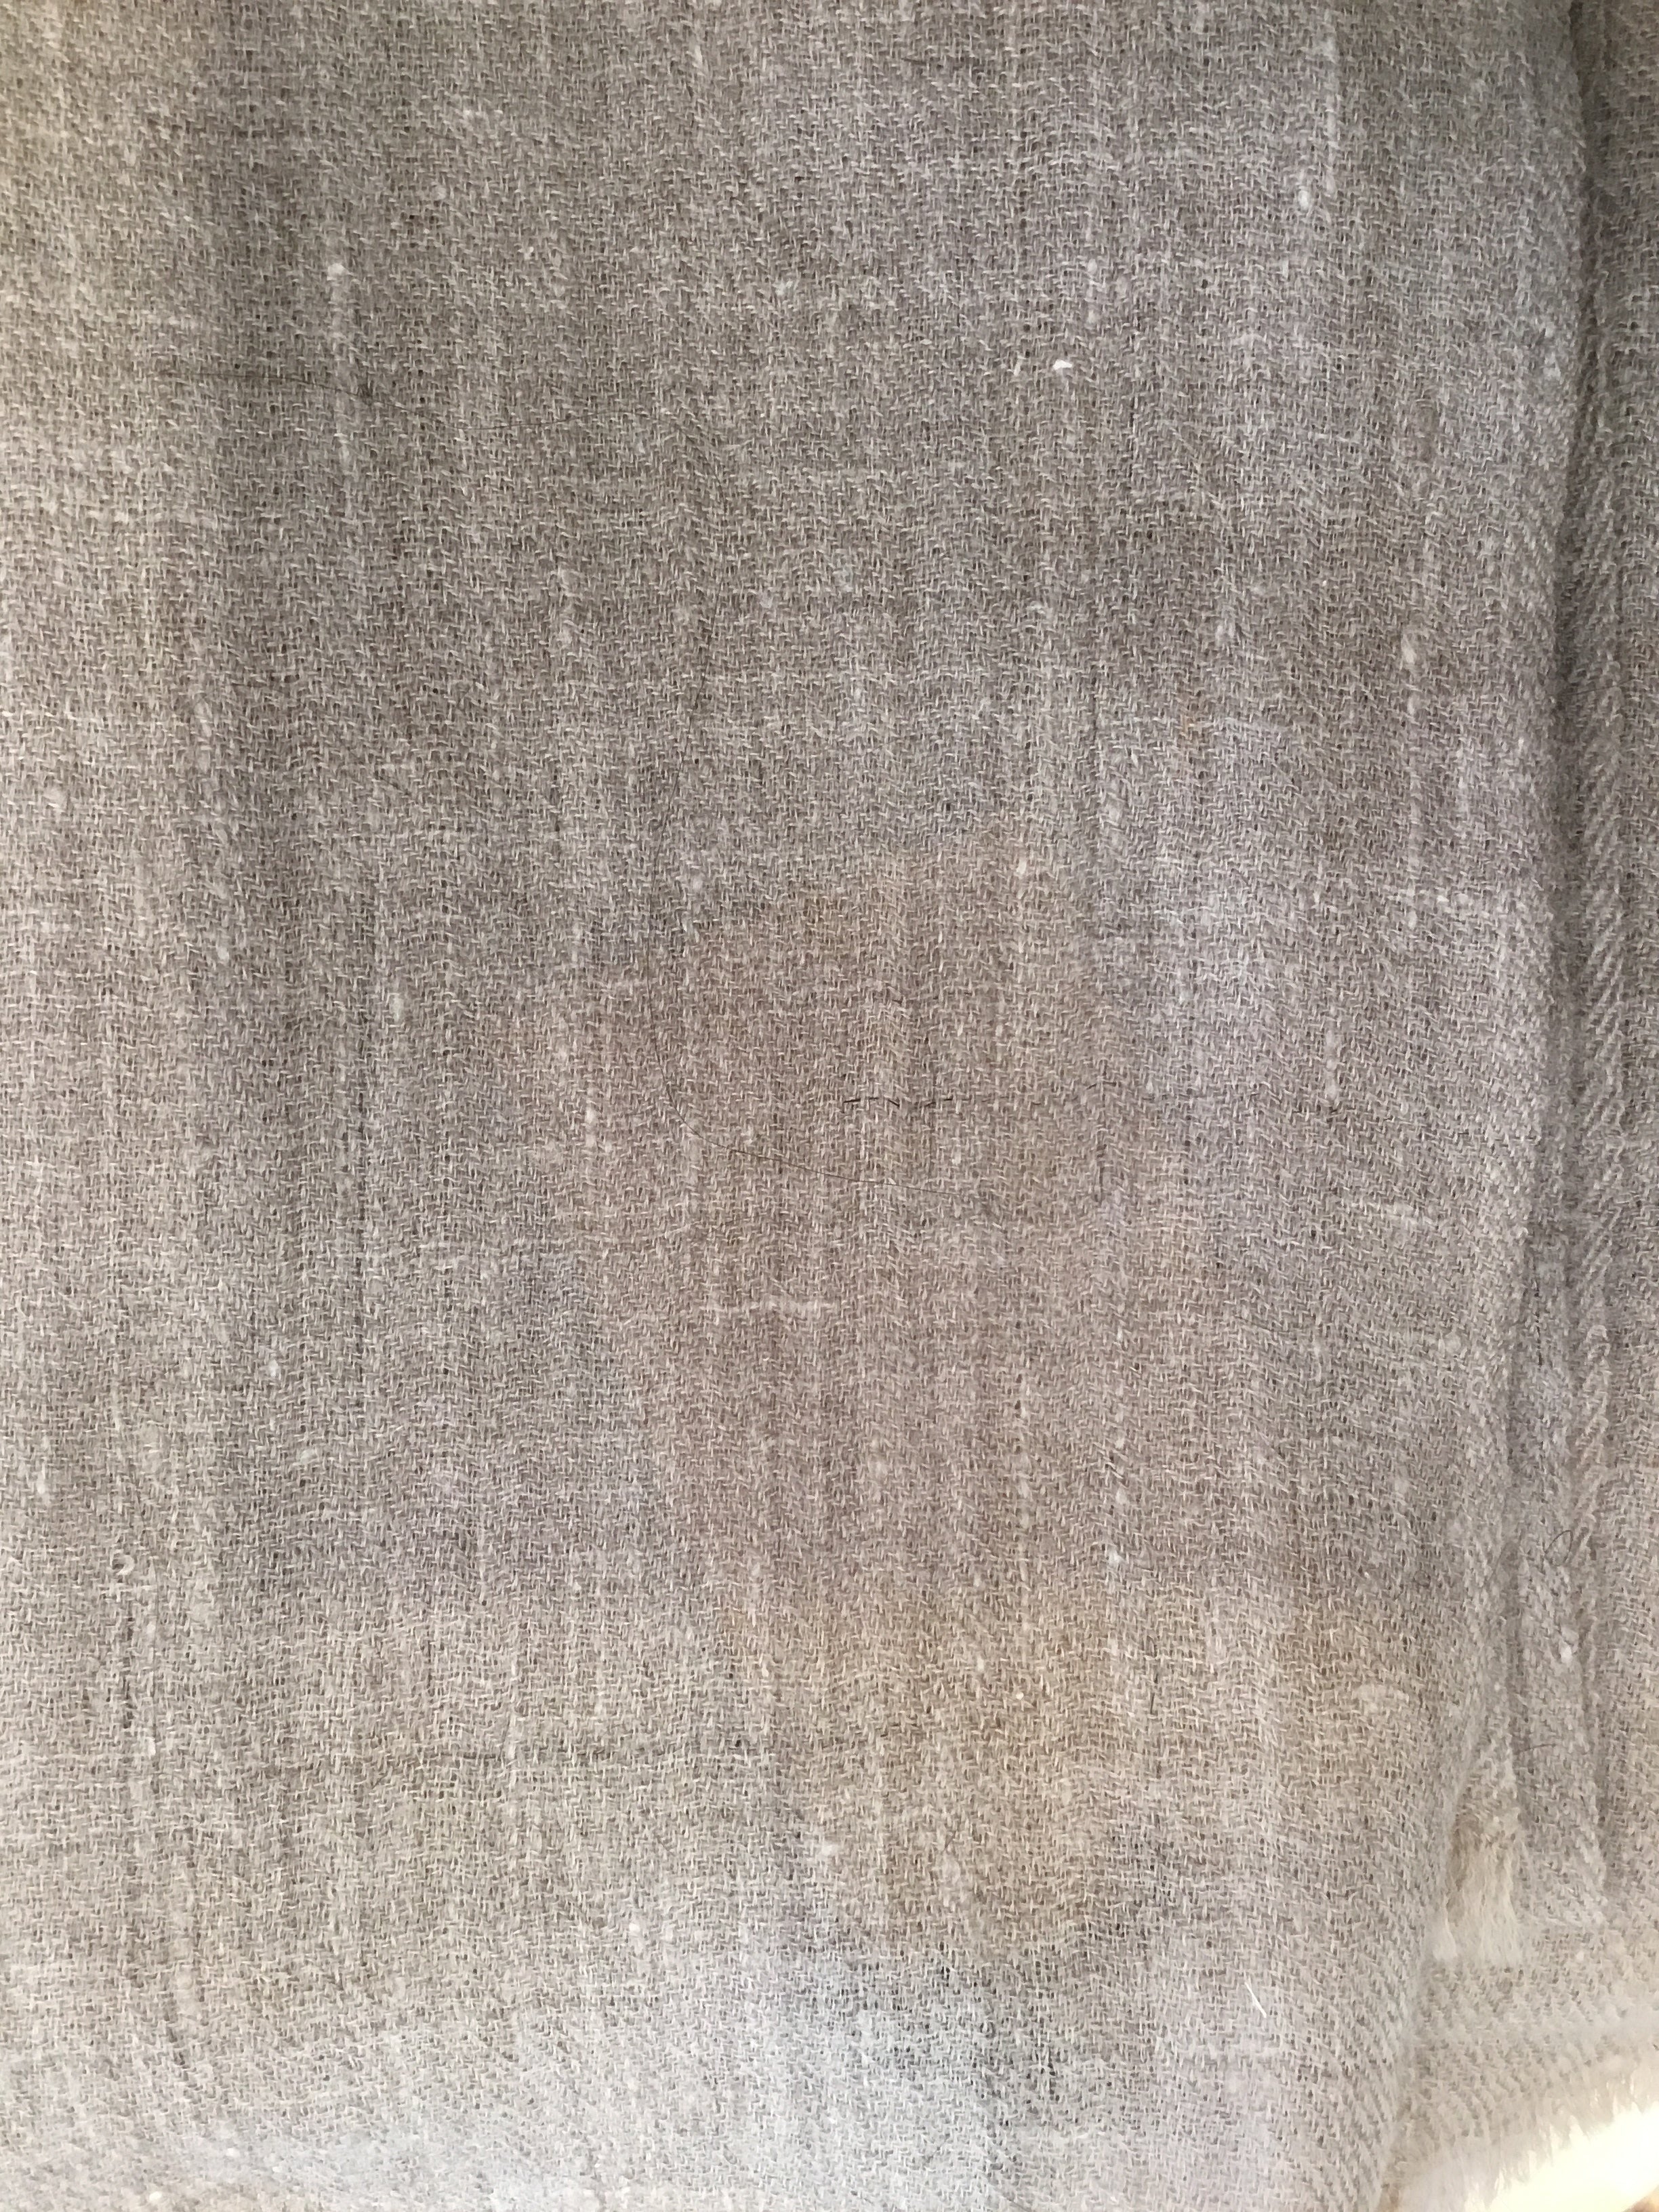 Pashmina Handloomed Scarf - Soft Natural Taupe